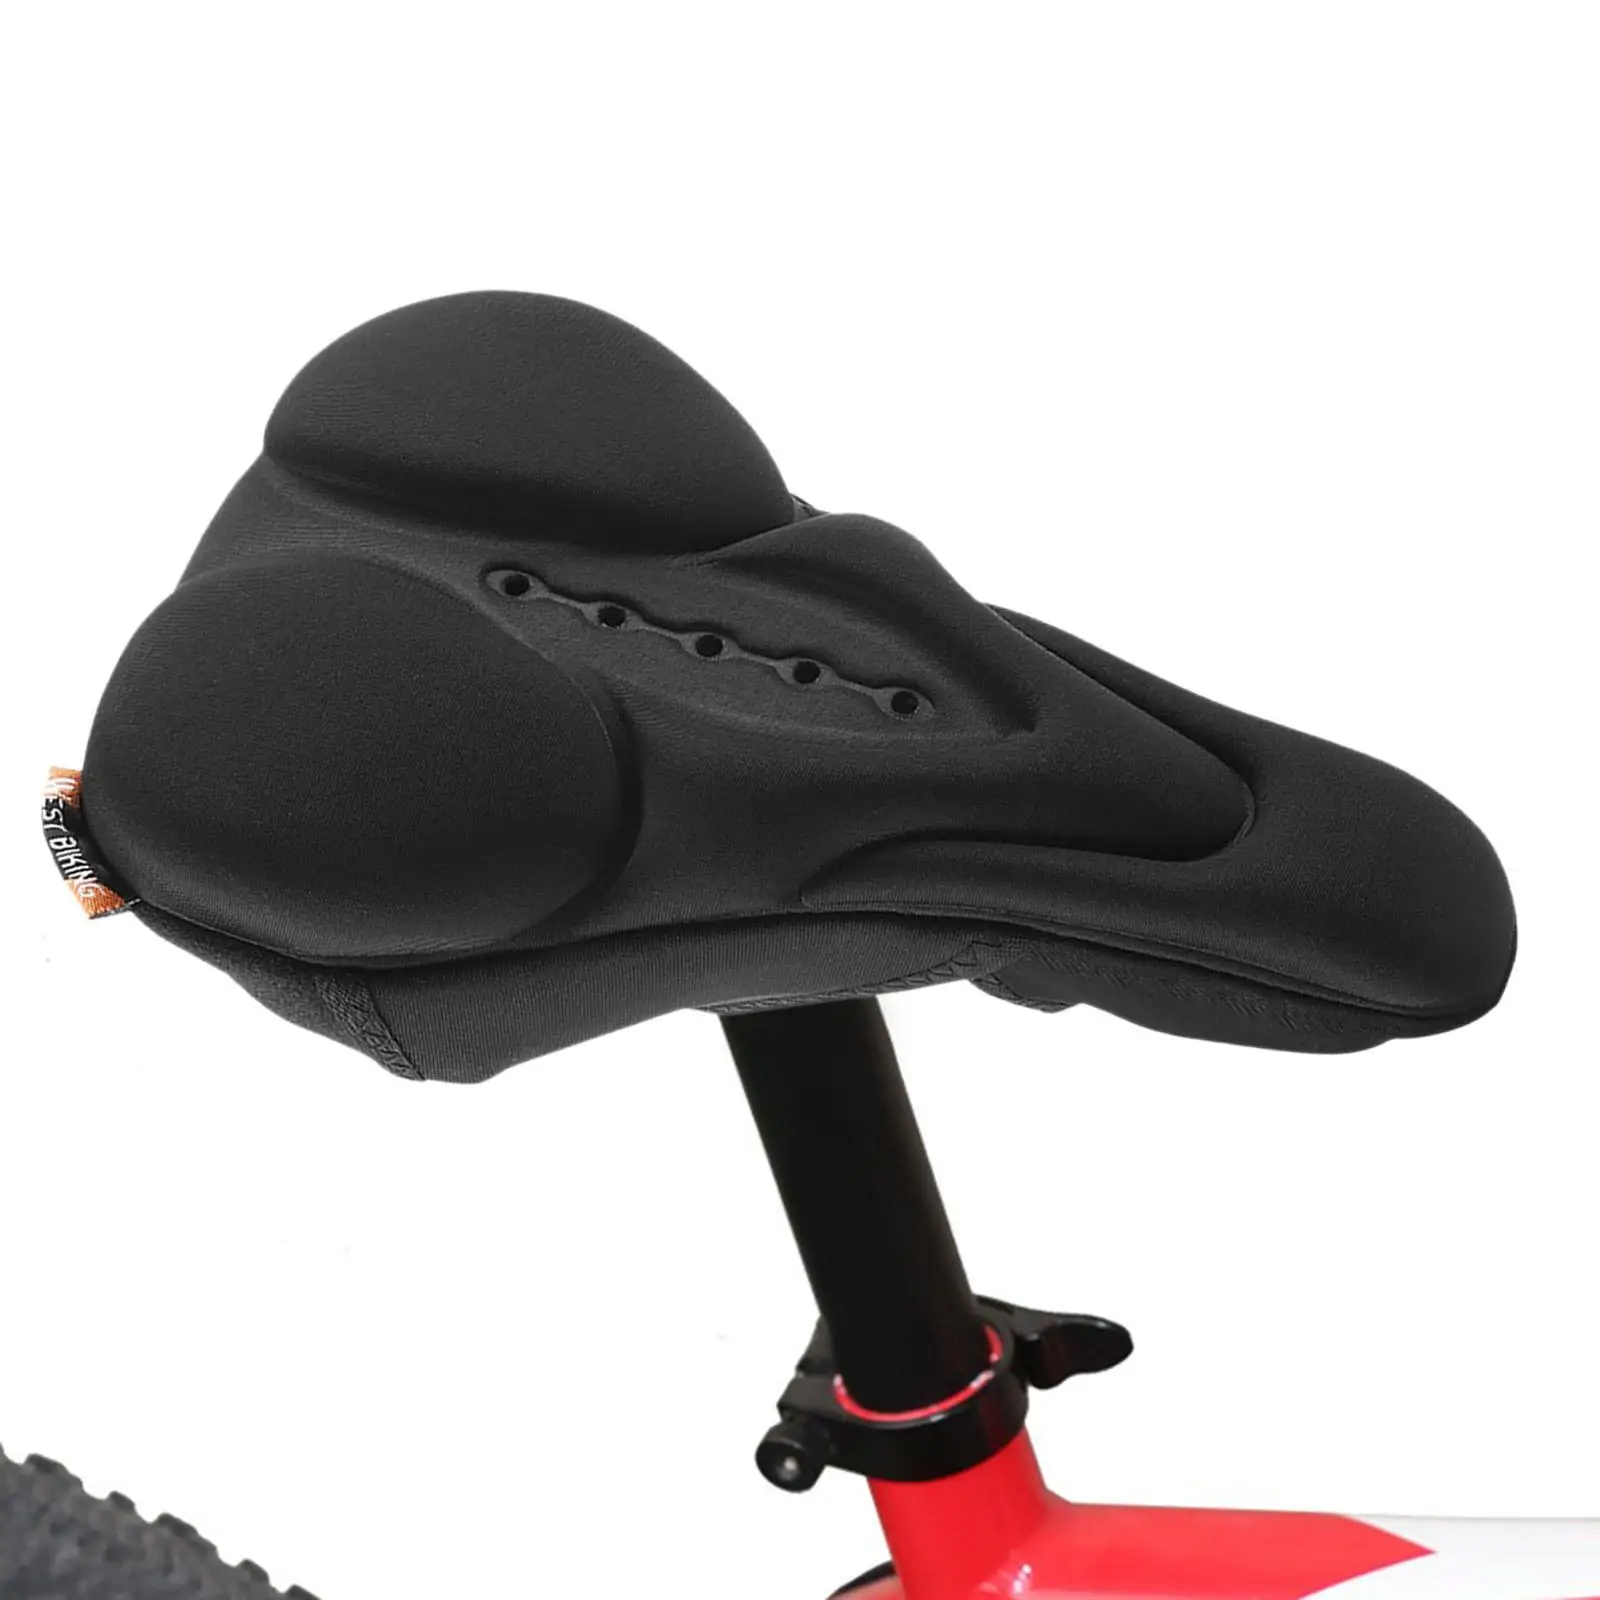 Bicycle Cushion, Bike Saddle, Non Slip, Cycling Components, Bicycle Seat Cover, Bike Seat for Outdoor Cycling, Road Bike